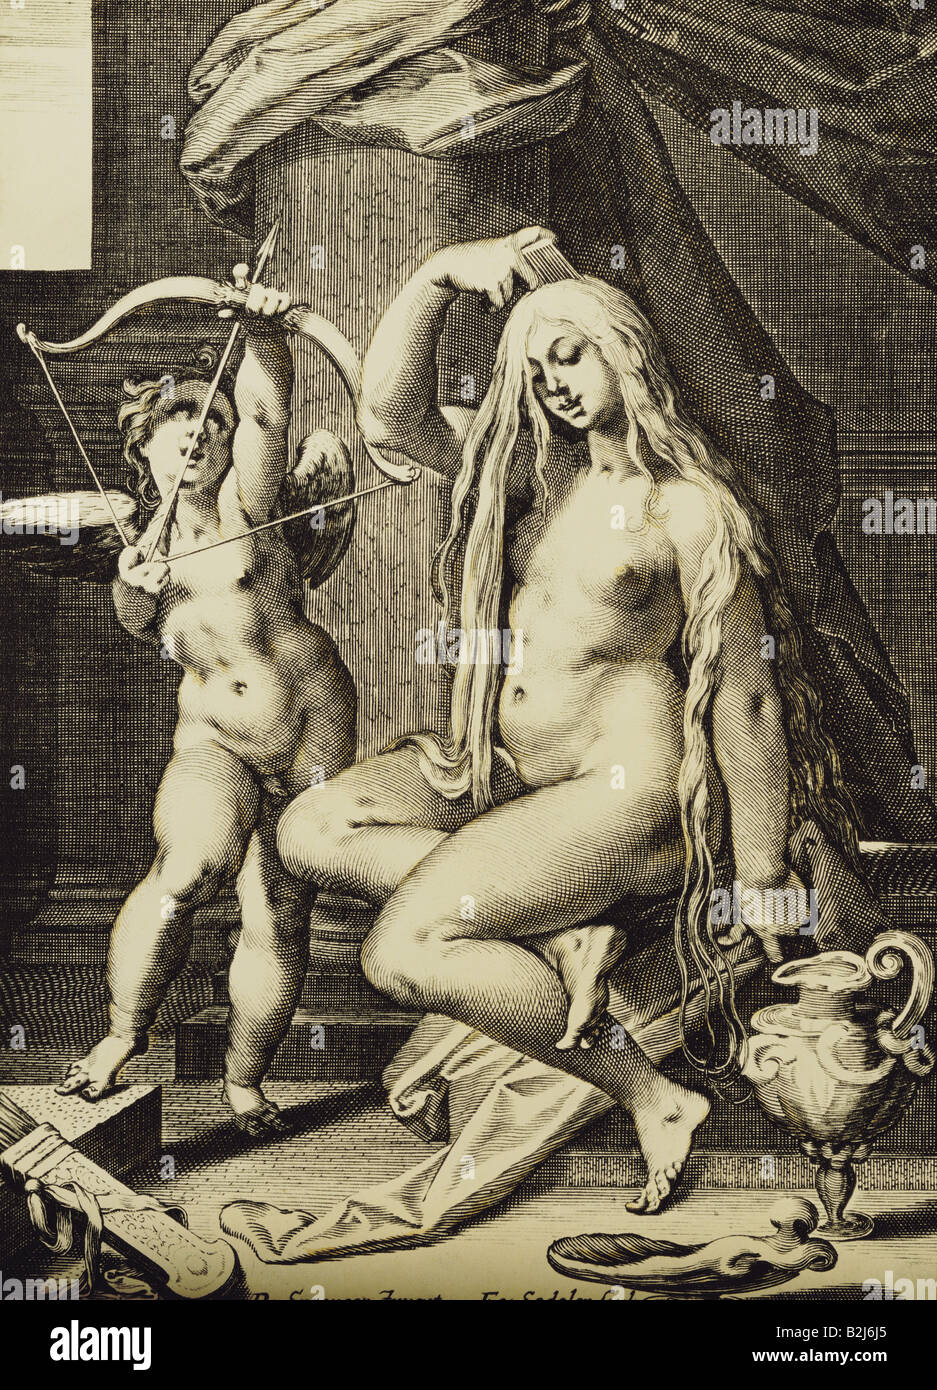 Venus, Roman goddess of love and beauty, 'The Toilet of Venus', copper engraving by Egidius Sadeler (1570 - 1629) after painting by Bartholomaeus Sprenger (1546 - 1611), private collection, , Artist's Copyright has not to be cleared Stock Photo